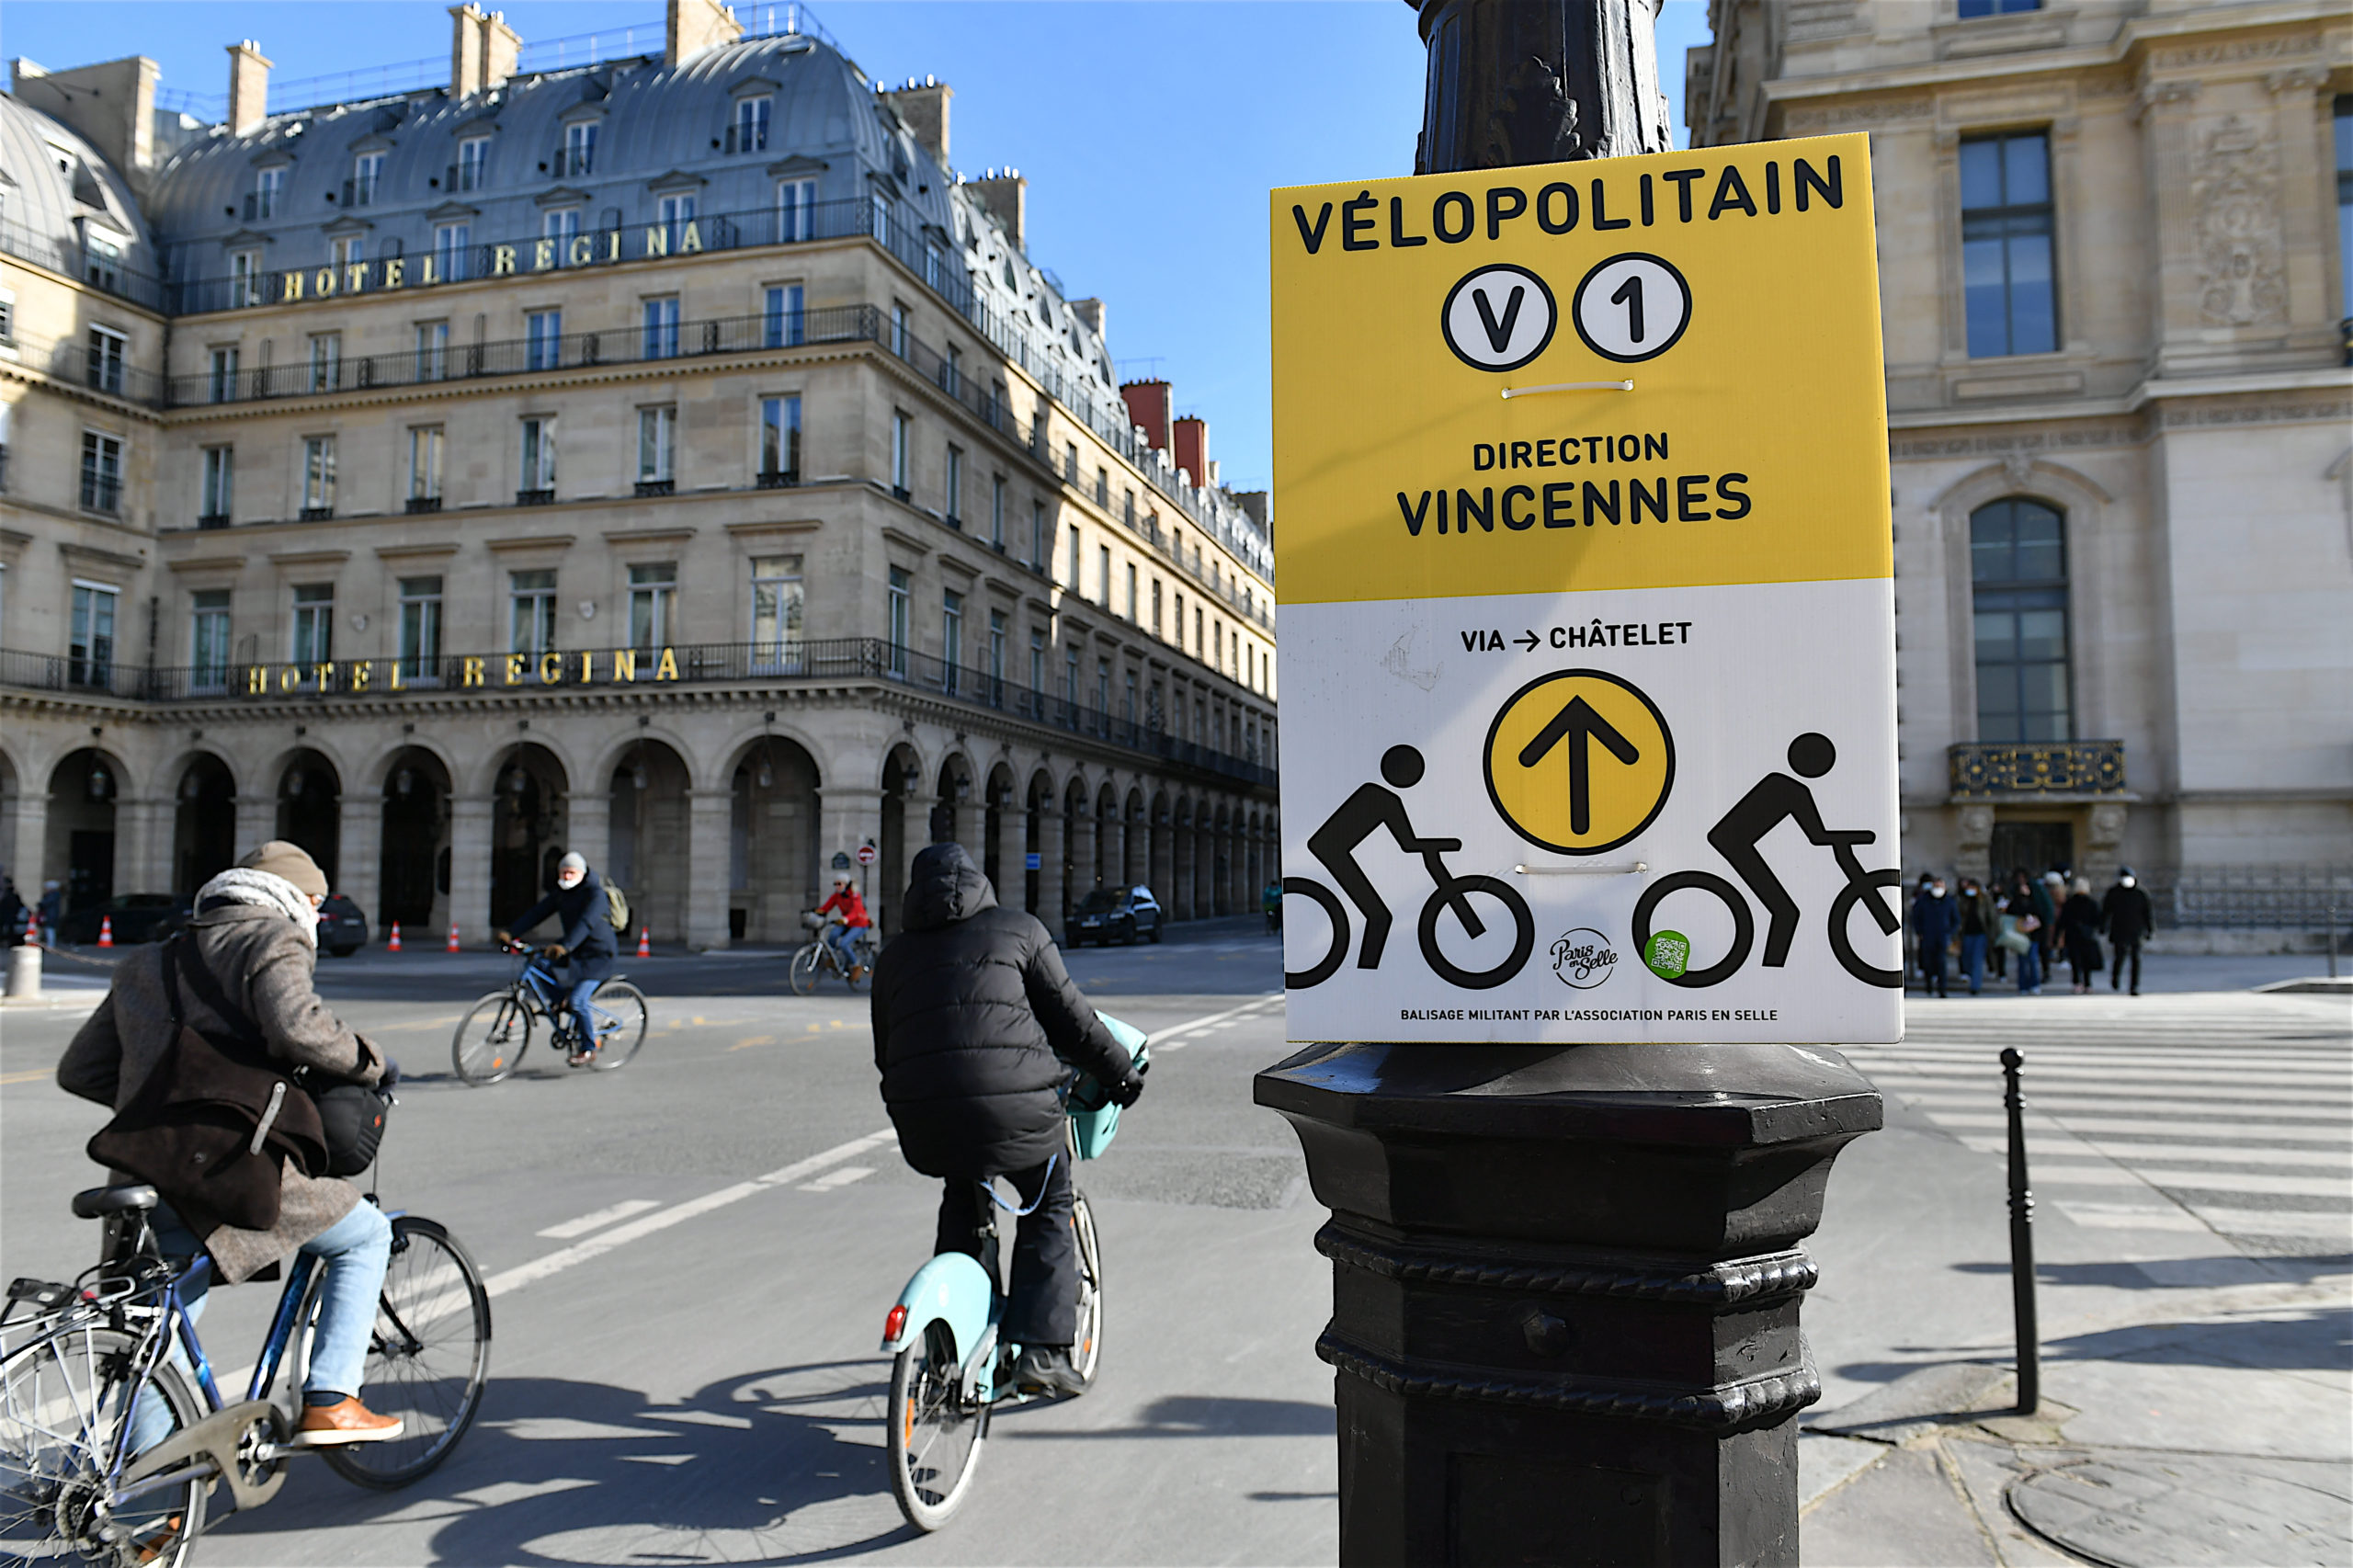 2023 STA Winner Paris, France Presents a Bold Vision for its Historic Streets